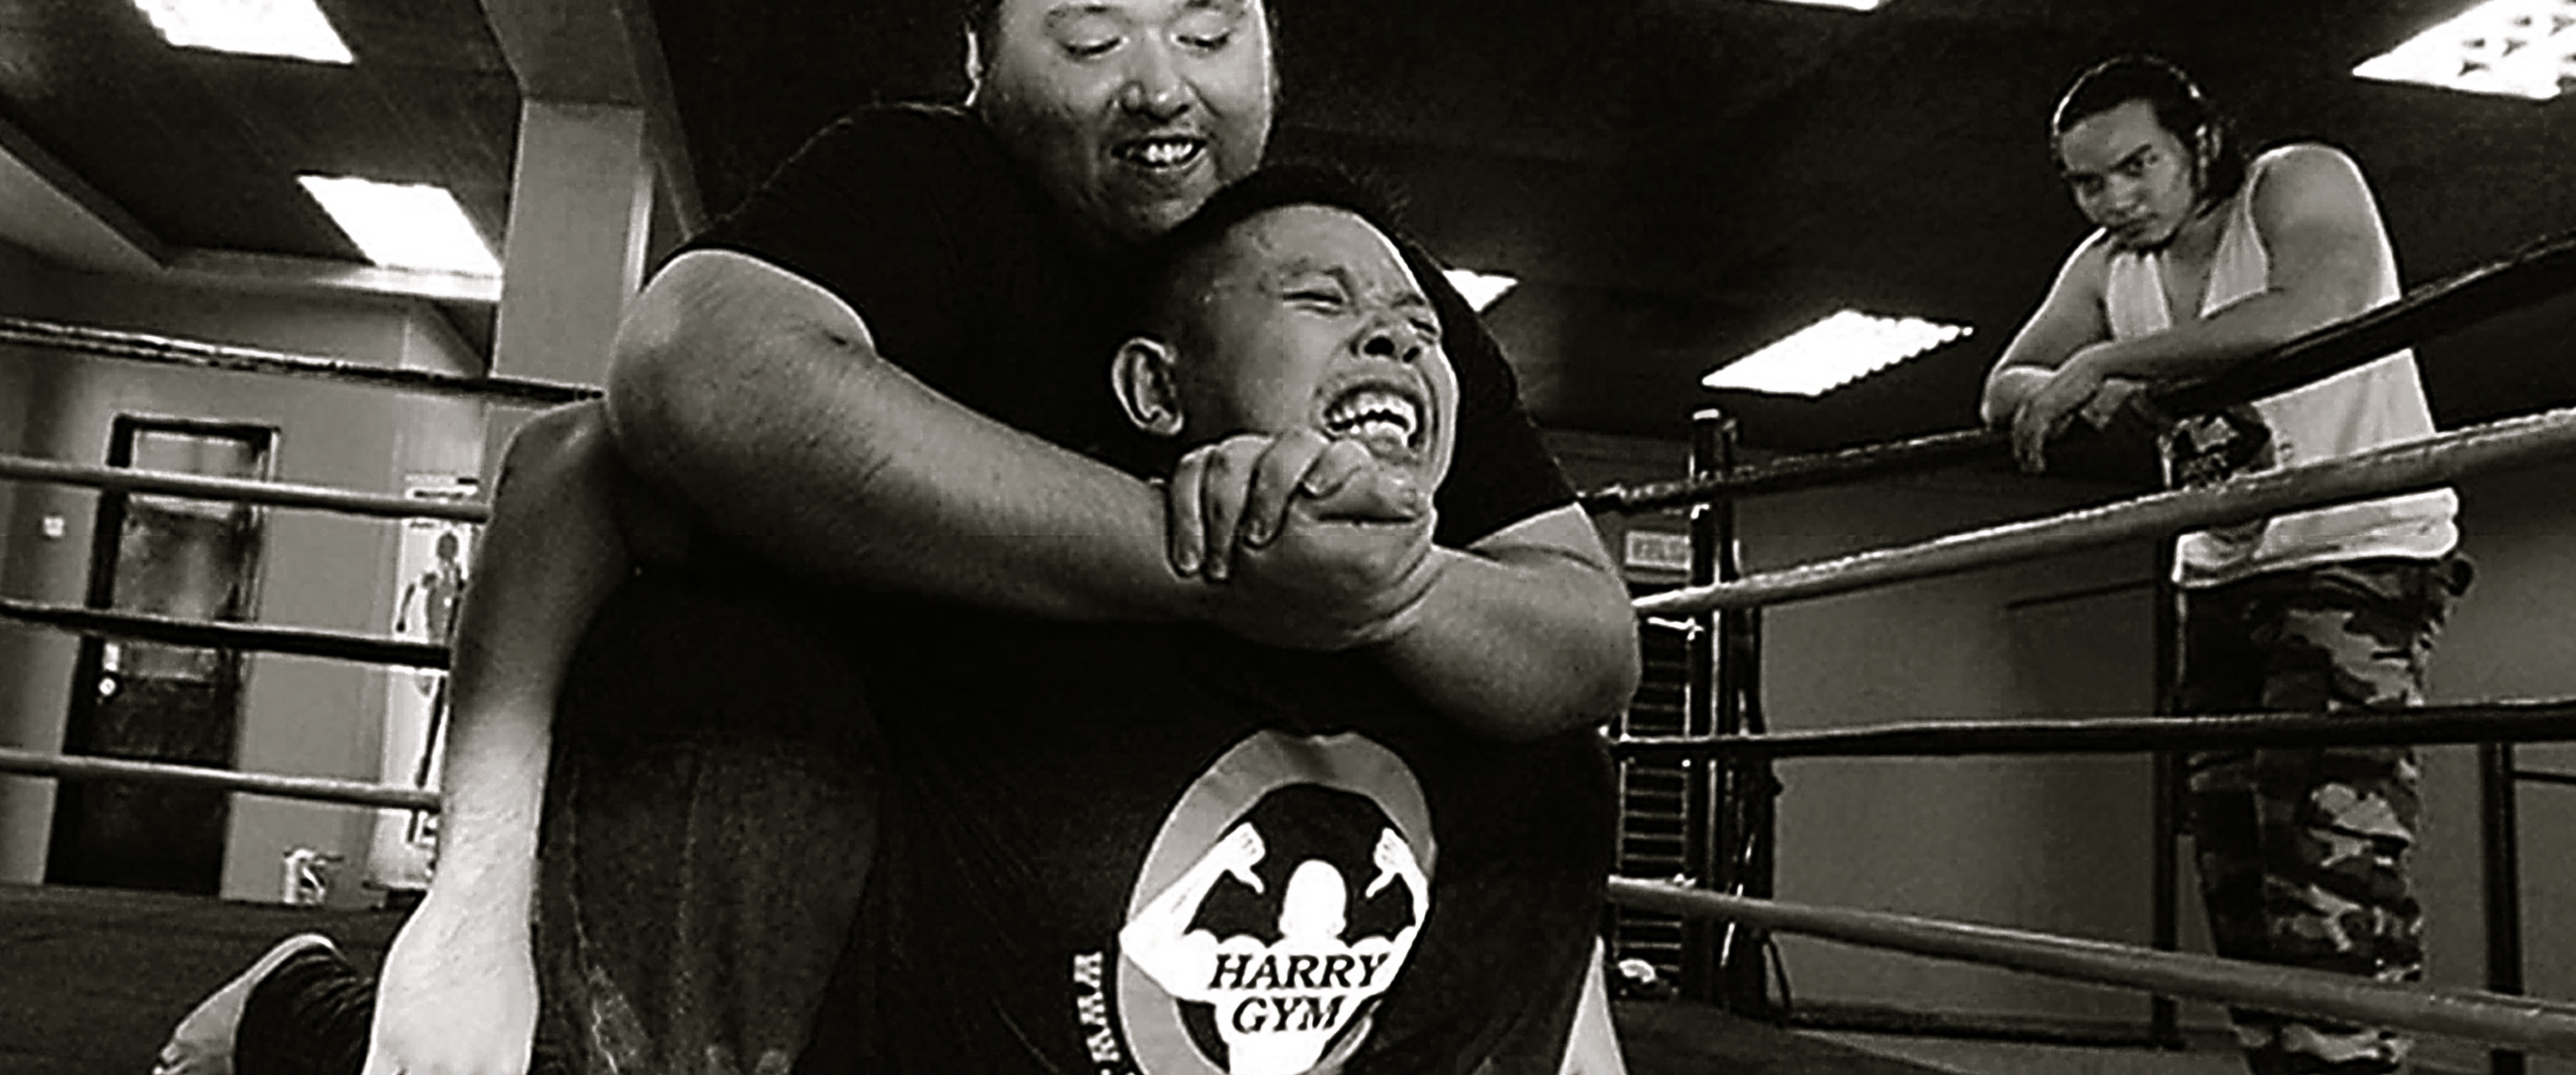 Mocked for aspiring to be a pro wrestler as a child, Ayez Fonseka (above right) started his own pro wrestling school in Malaysia, <a href=https://www.facebook.com/GustiMalaysia?fref=ts target=_blank>Persekutuan Gusti Malaysia</a>.